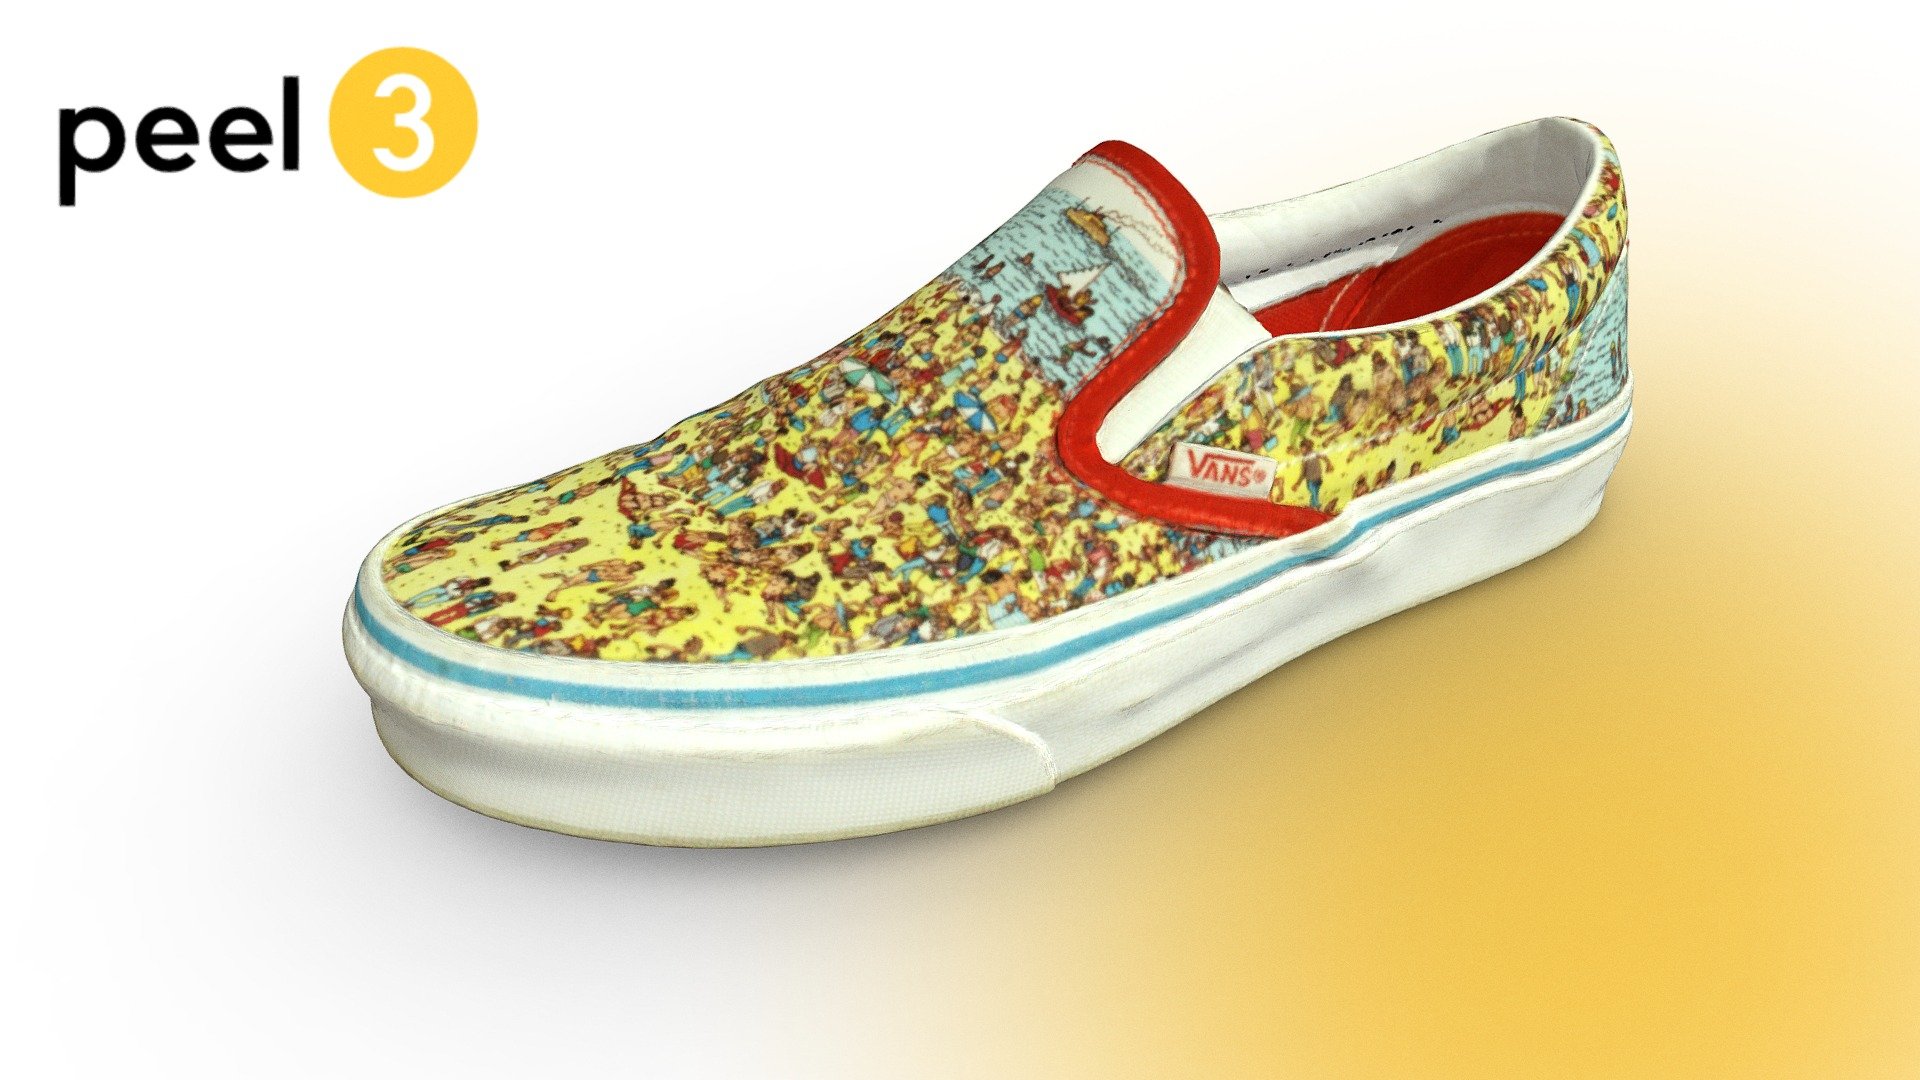 Bright and colorful this is a 3d scan I really like. This a special edition Vans slippers scanned with peel 3, it shoes the color capture capabilities of the scanner. The one question left is can you find Waldo? - Special edition Vans shoes scanned with peel 3 - 3D model by peel-3d.com 3d model